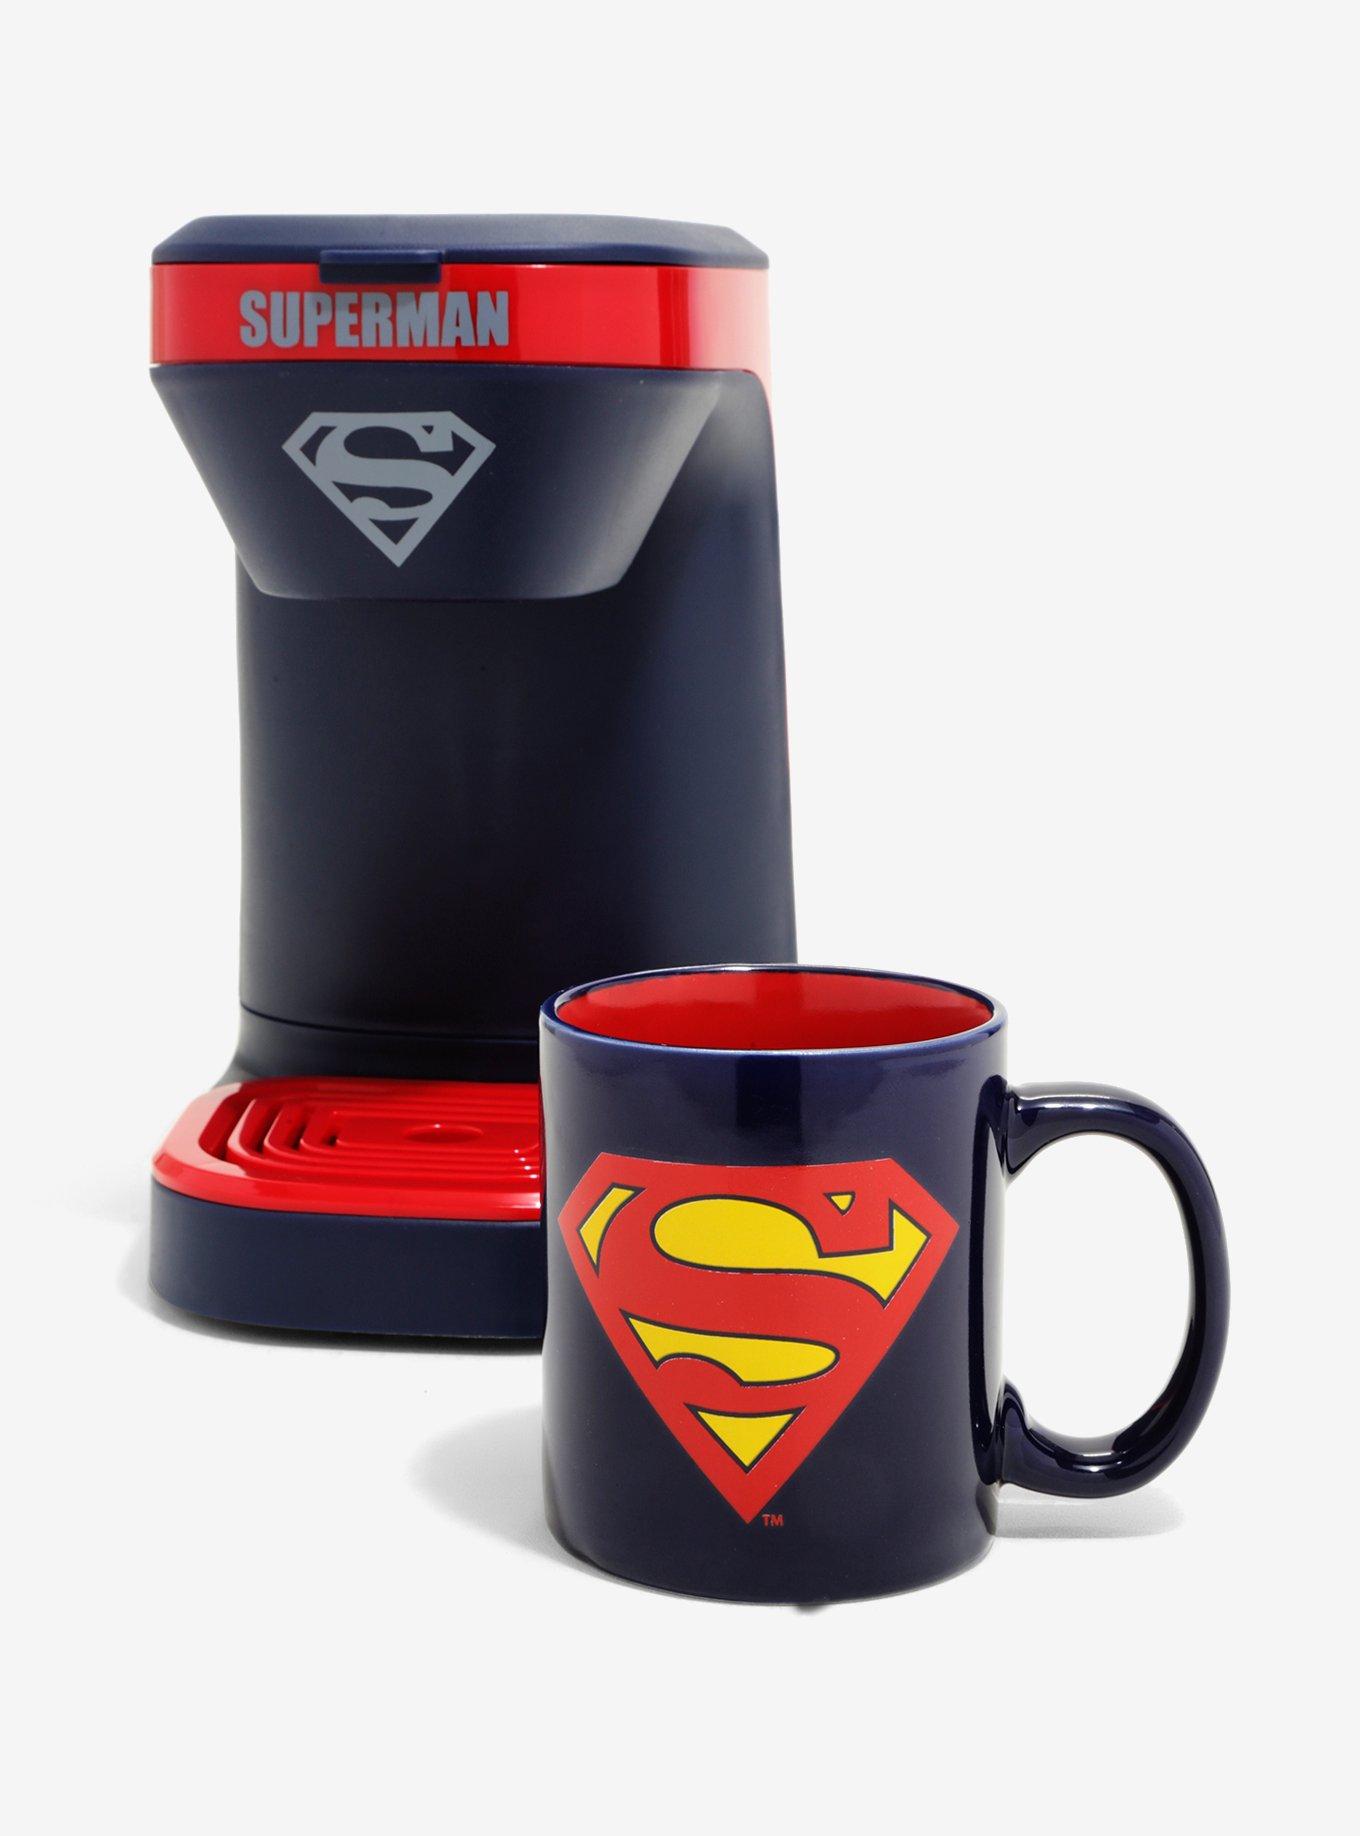 DC Superman 1 Cup Coffee Maker